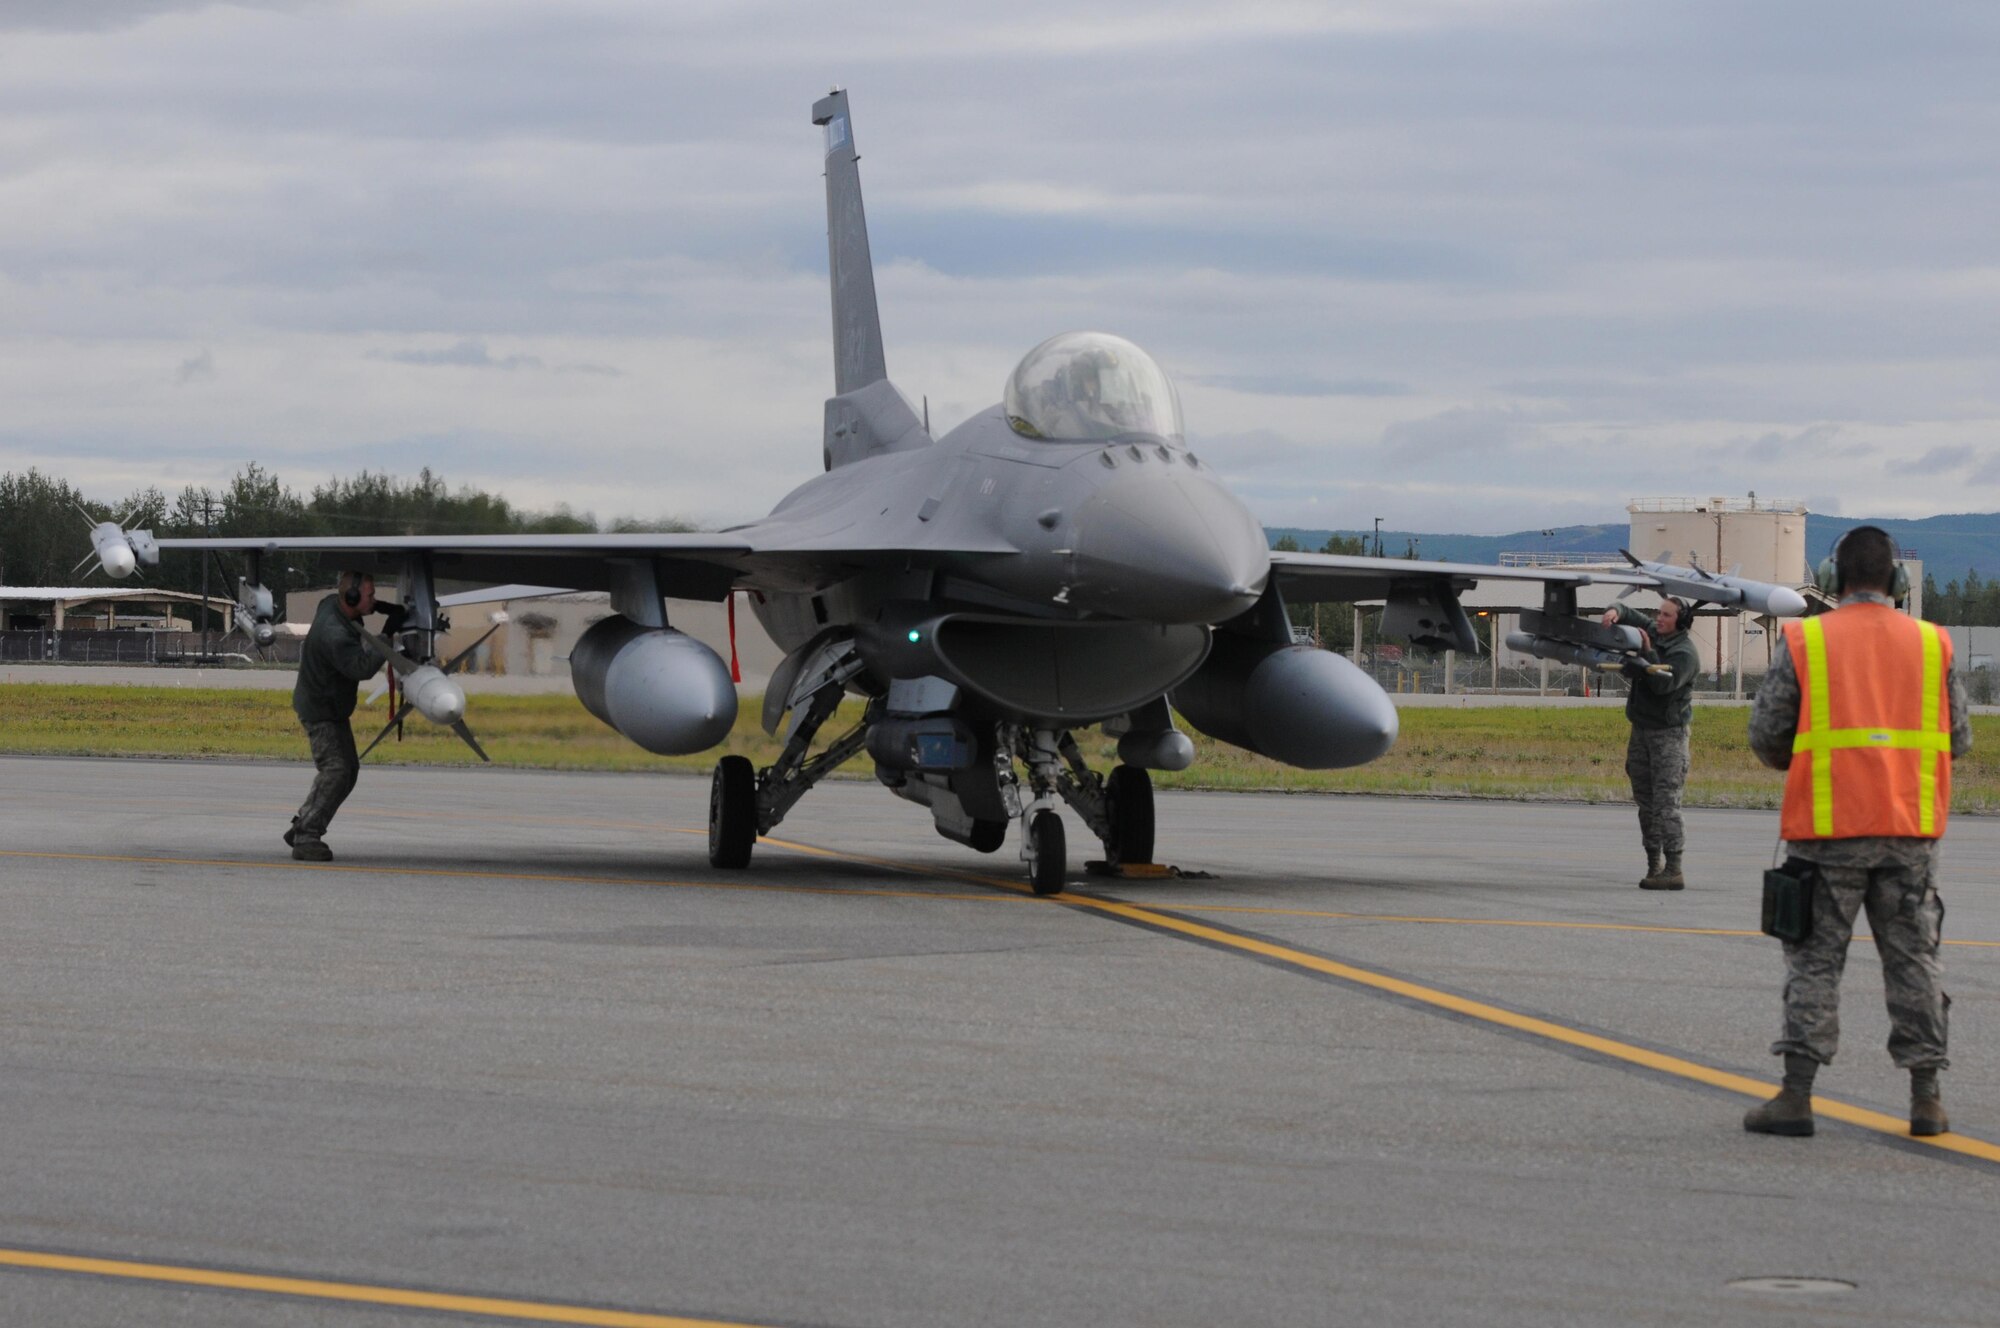 U.S. Air Force weapons load Airmen from the 148th Fighter Wing, Duluth, Minn., perform a pre-flight inspection while at Eielson Air Force Base, Alaska, Aug. 11, 2015, during RED FLAG-Alaska 15-3.  RF-A is a Pacific Air Forces commander-directed field training exercise for U.S. and partner nation forces, providing combined offensive counter-air, interdiction, close air support and large force employment training in a simulated combat environment.  (U.S. Air Force photo by Master Sgt. Ralph Kapustka/Released)